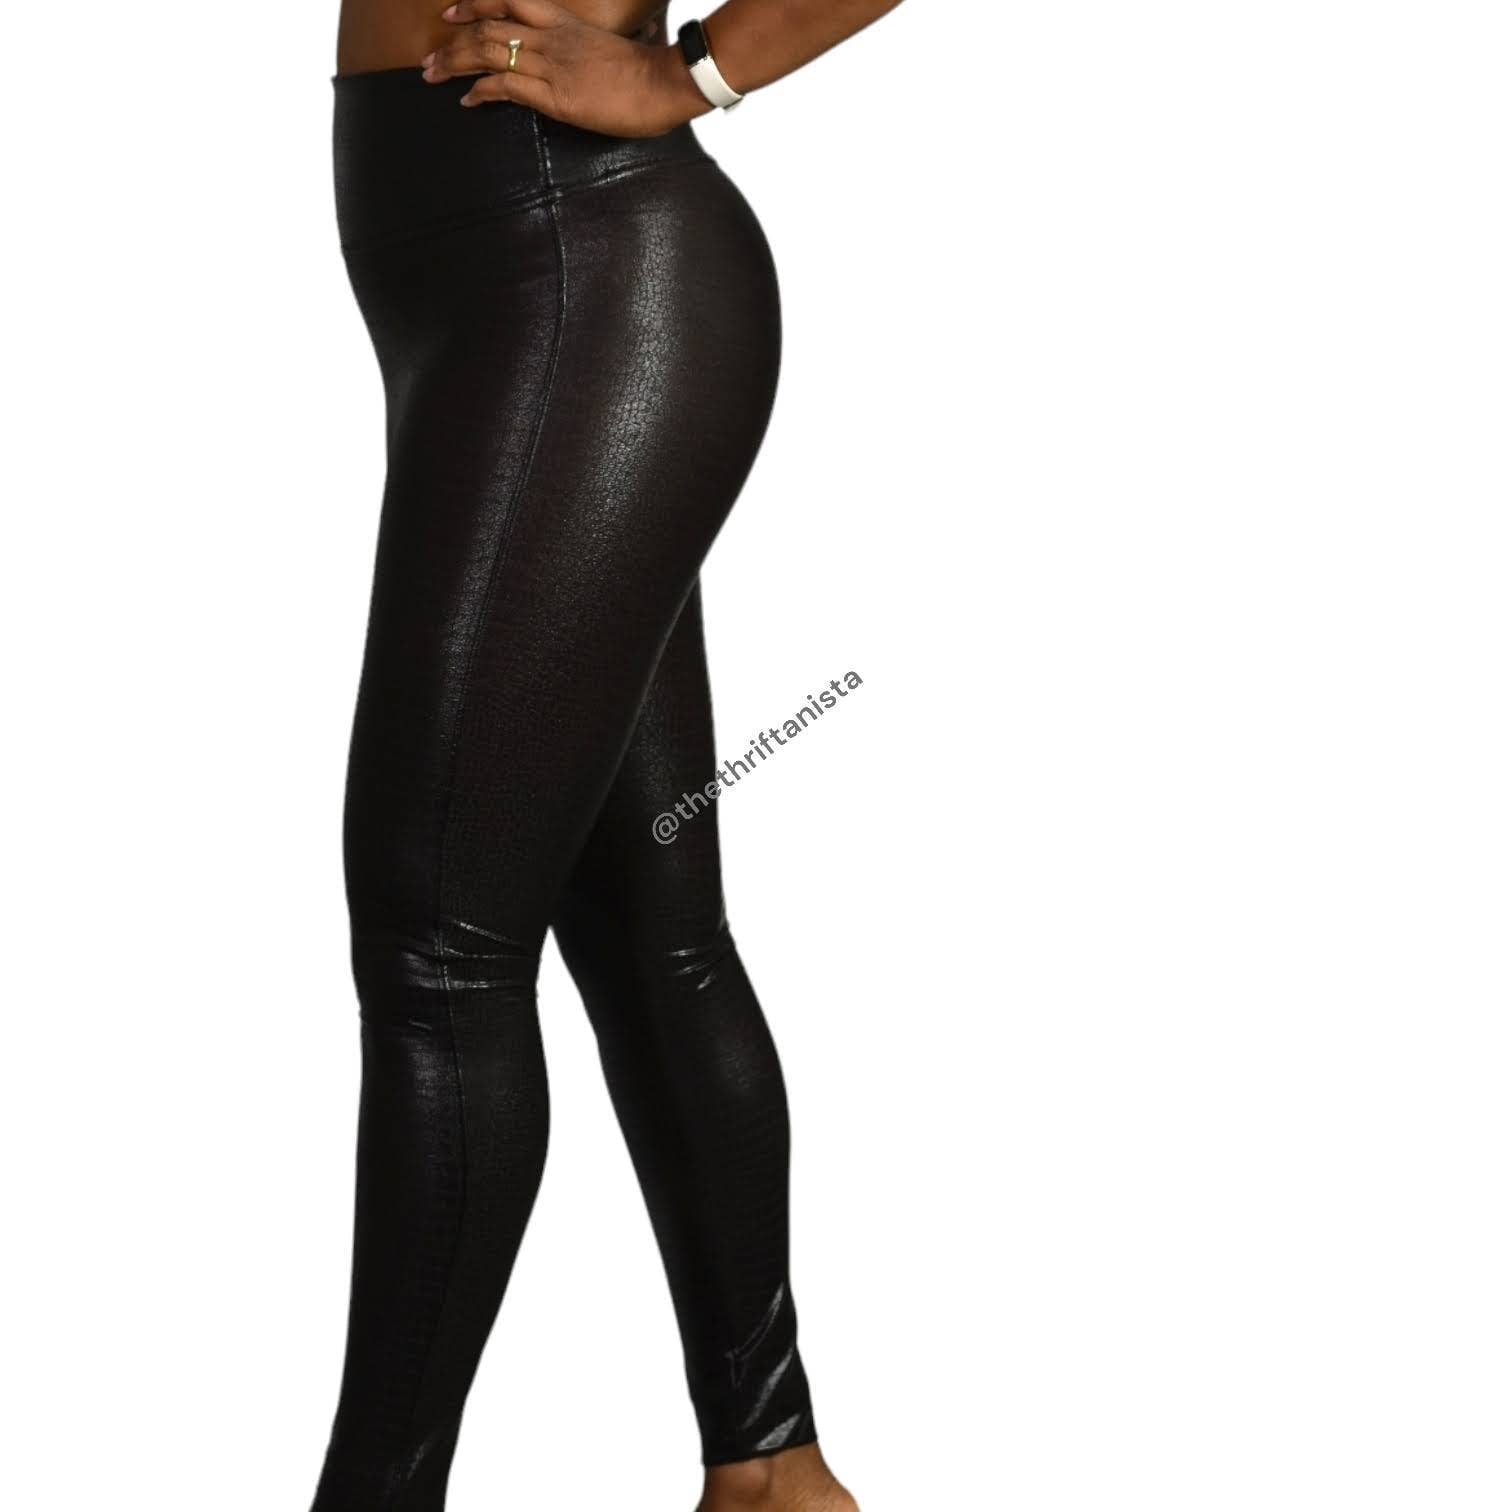 Spanx Faux Leather Croc Leggings Brown Shine High Waist Shaping Slimming Size Small